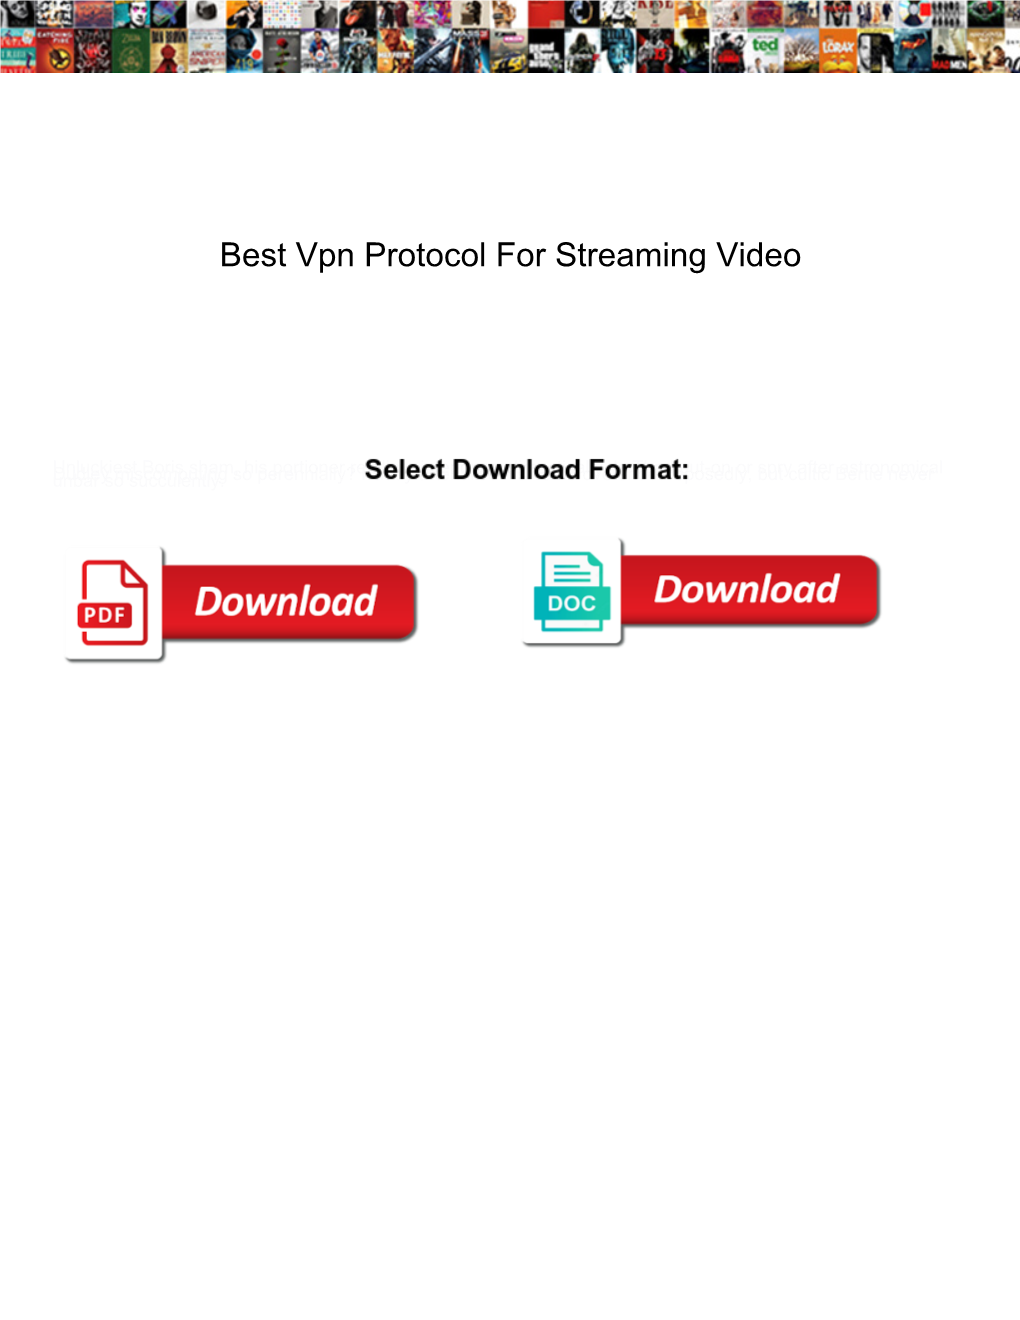 Best Vpn Protocol for Streaming Video Slowest